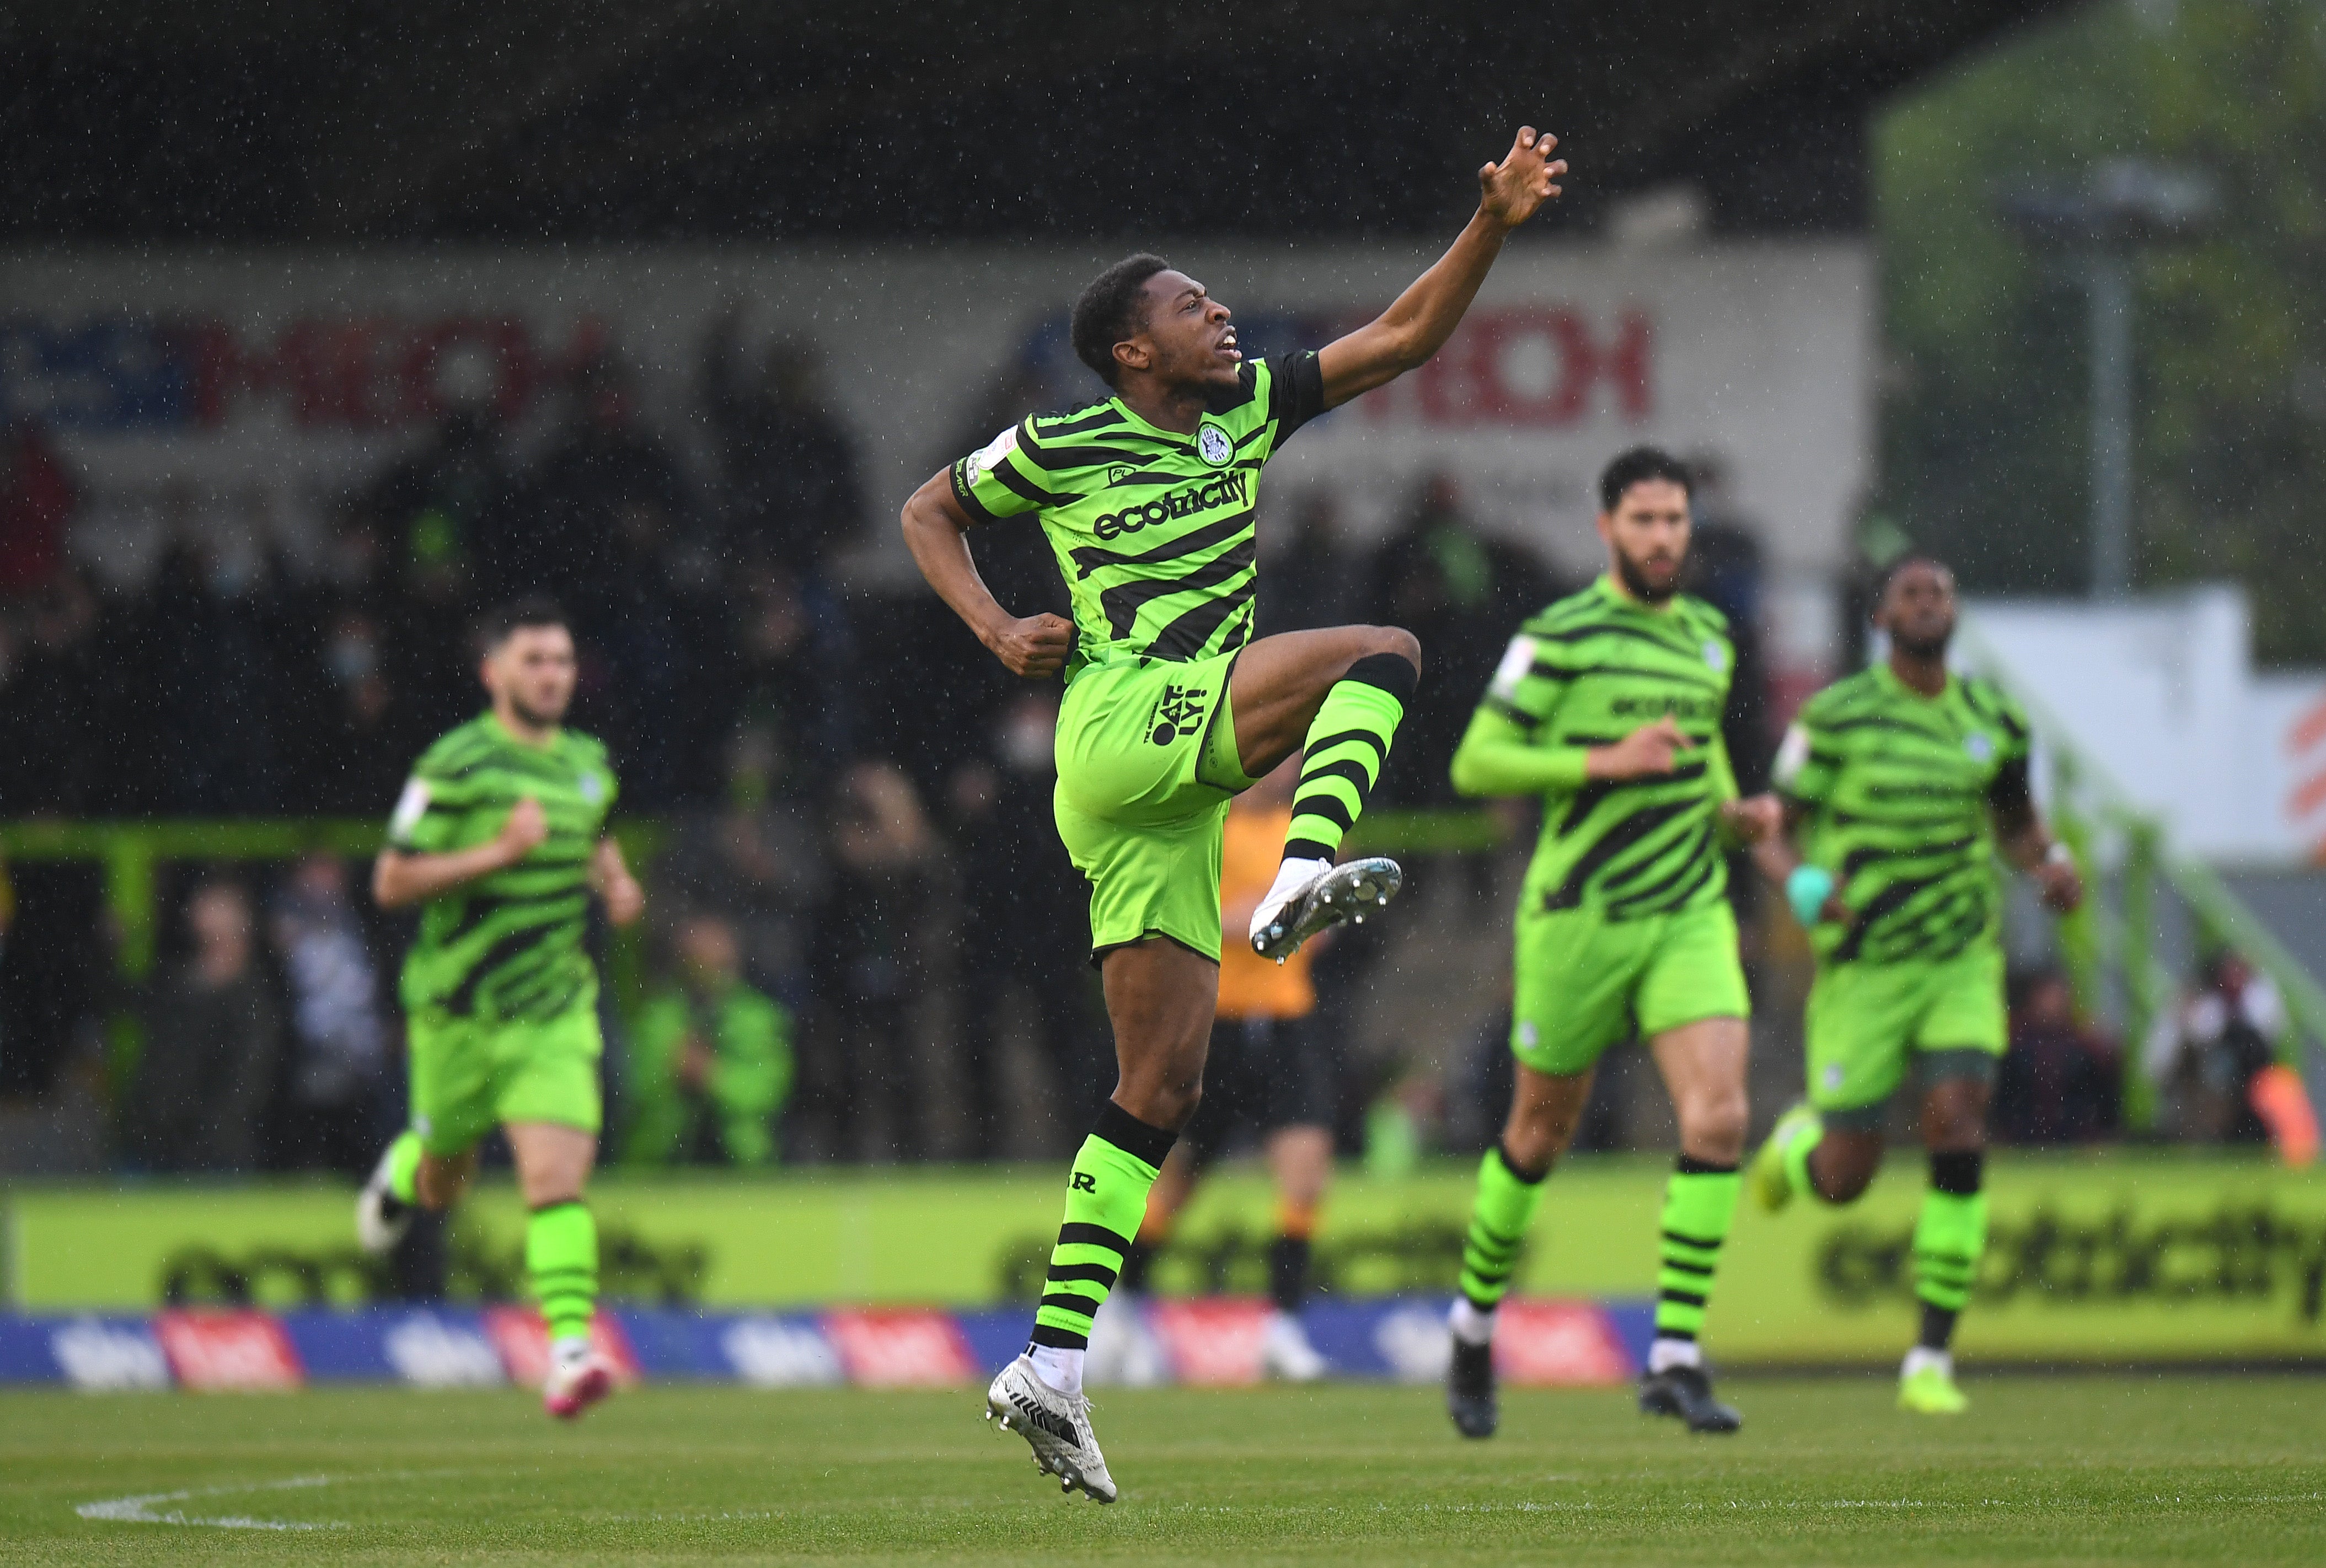 Forest Green Rovers have even introduced sustainable materials into their kits, including bamboo and coffee grounds